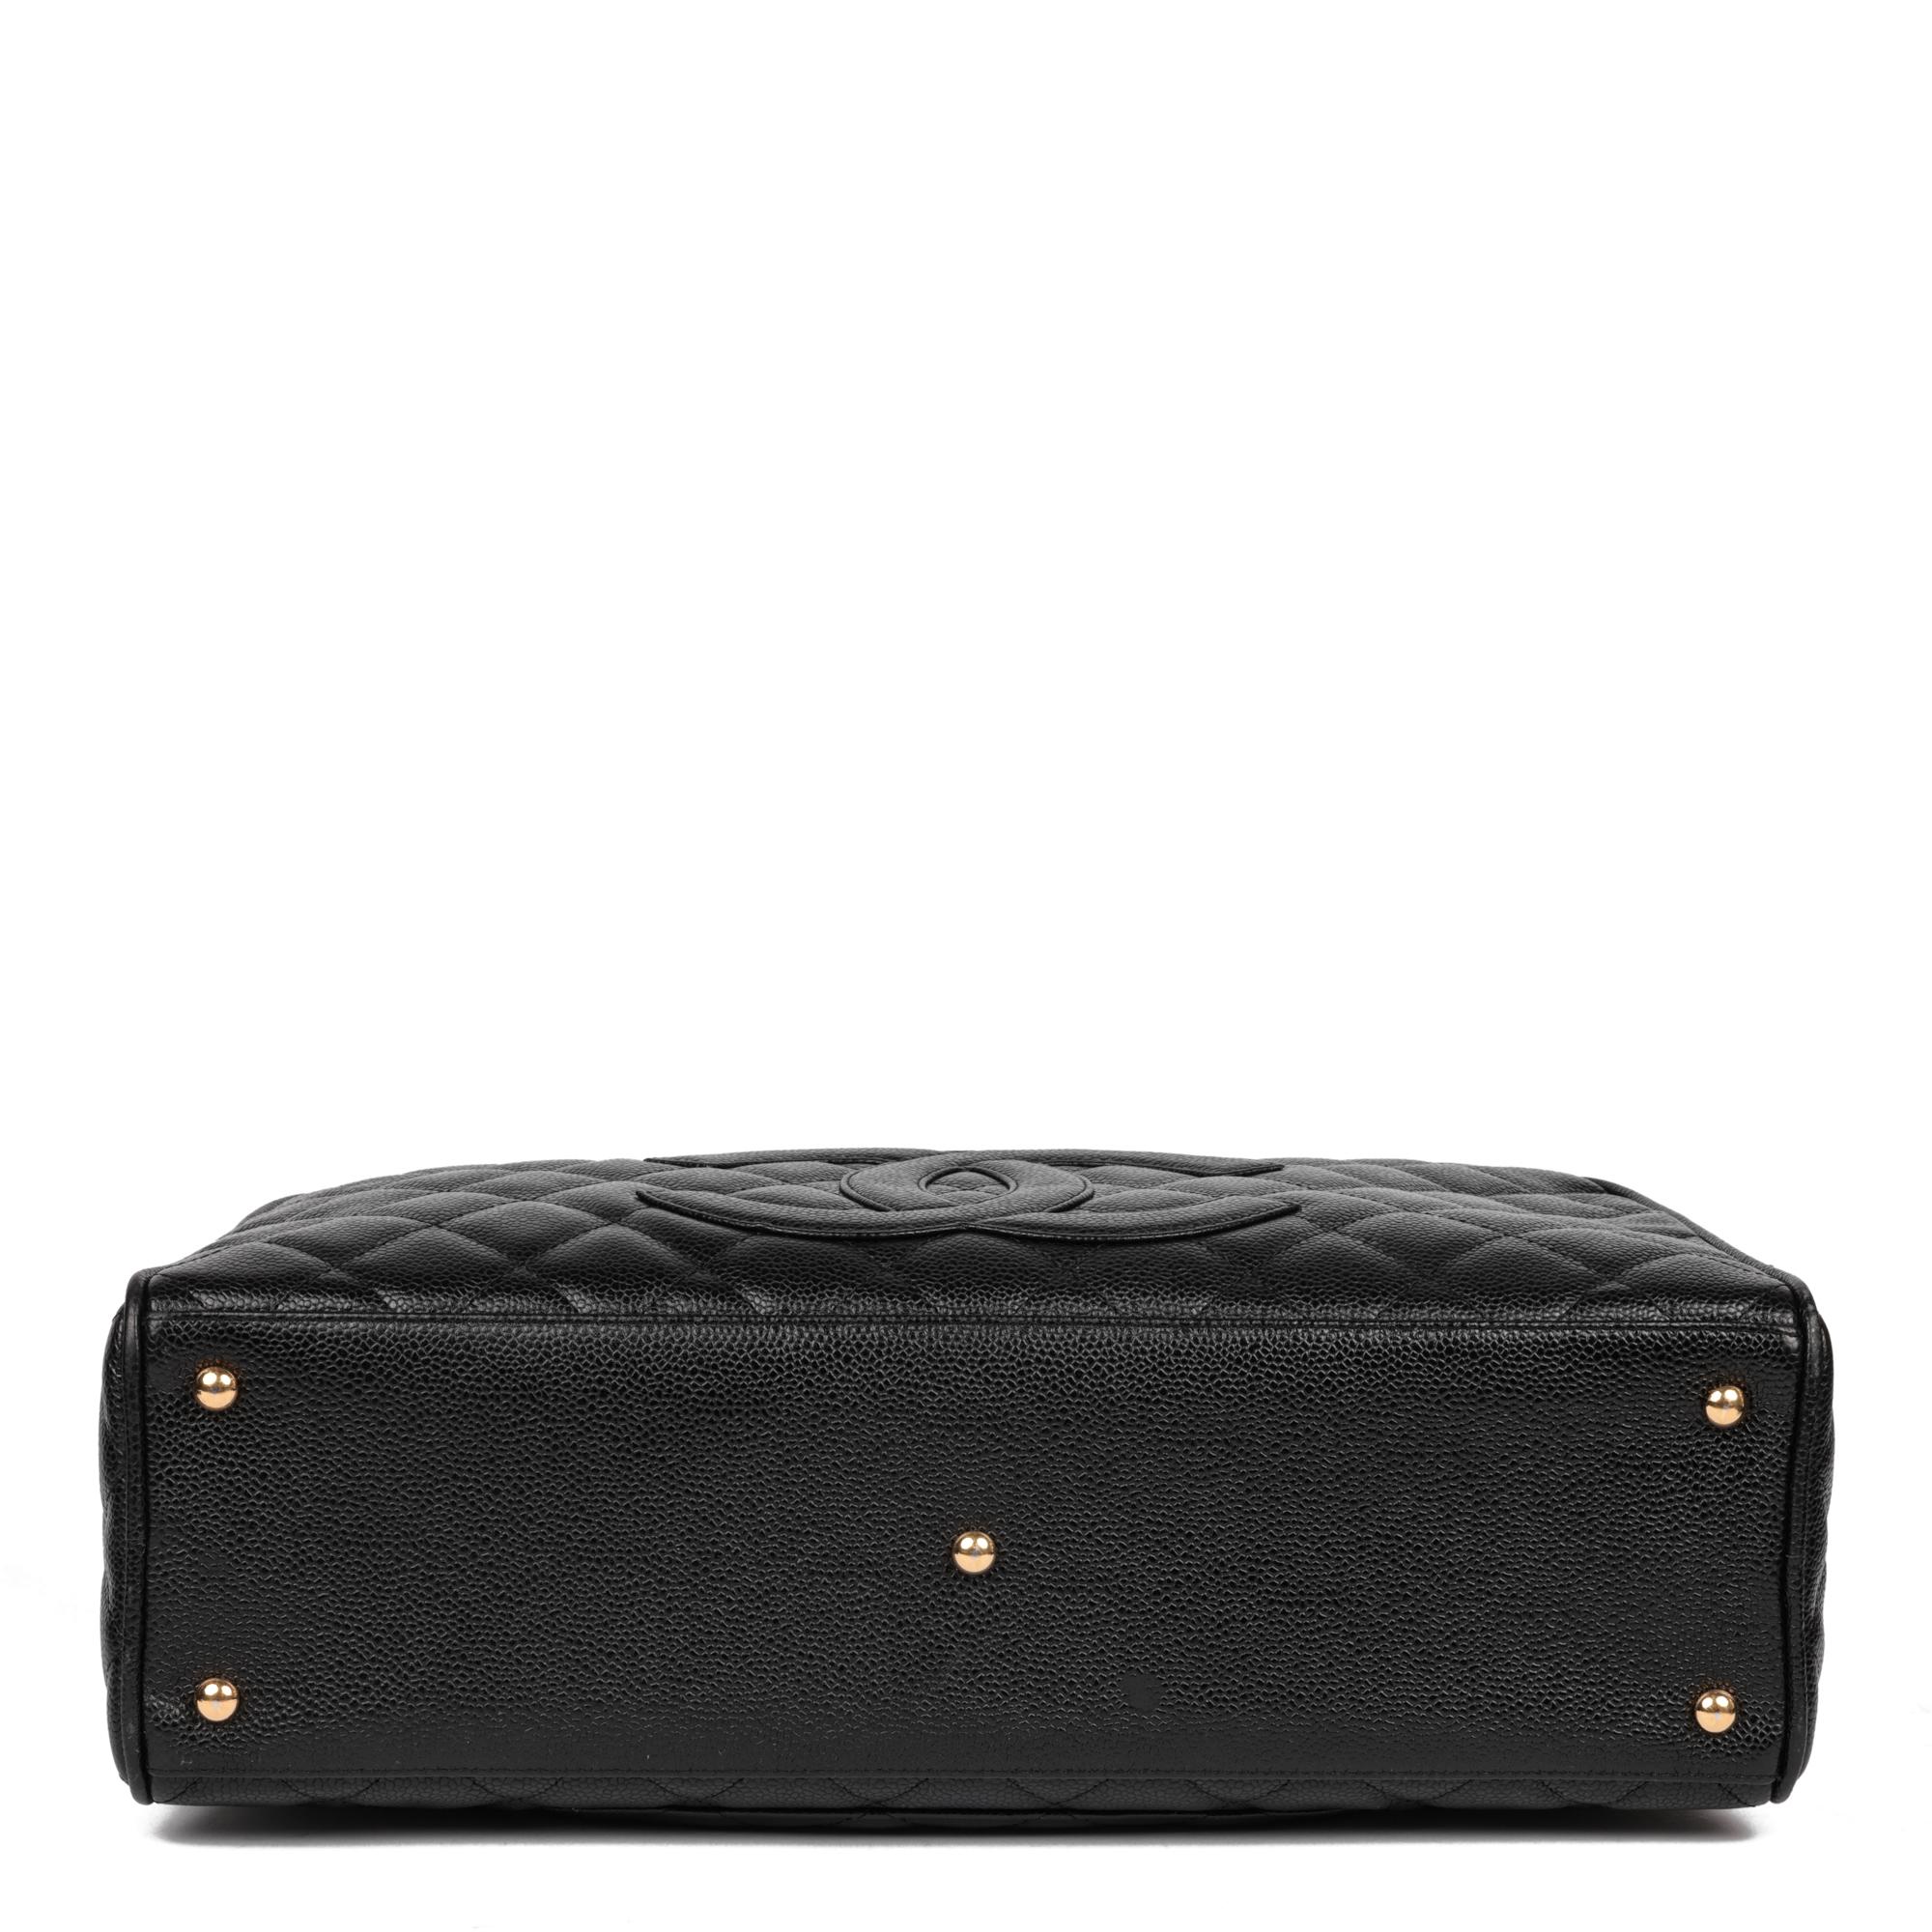 CHANEL Black Quilted Caviar Leather Boston Bag 1